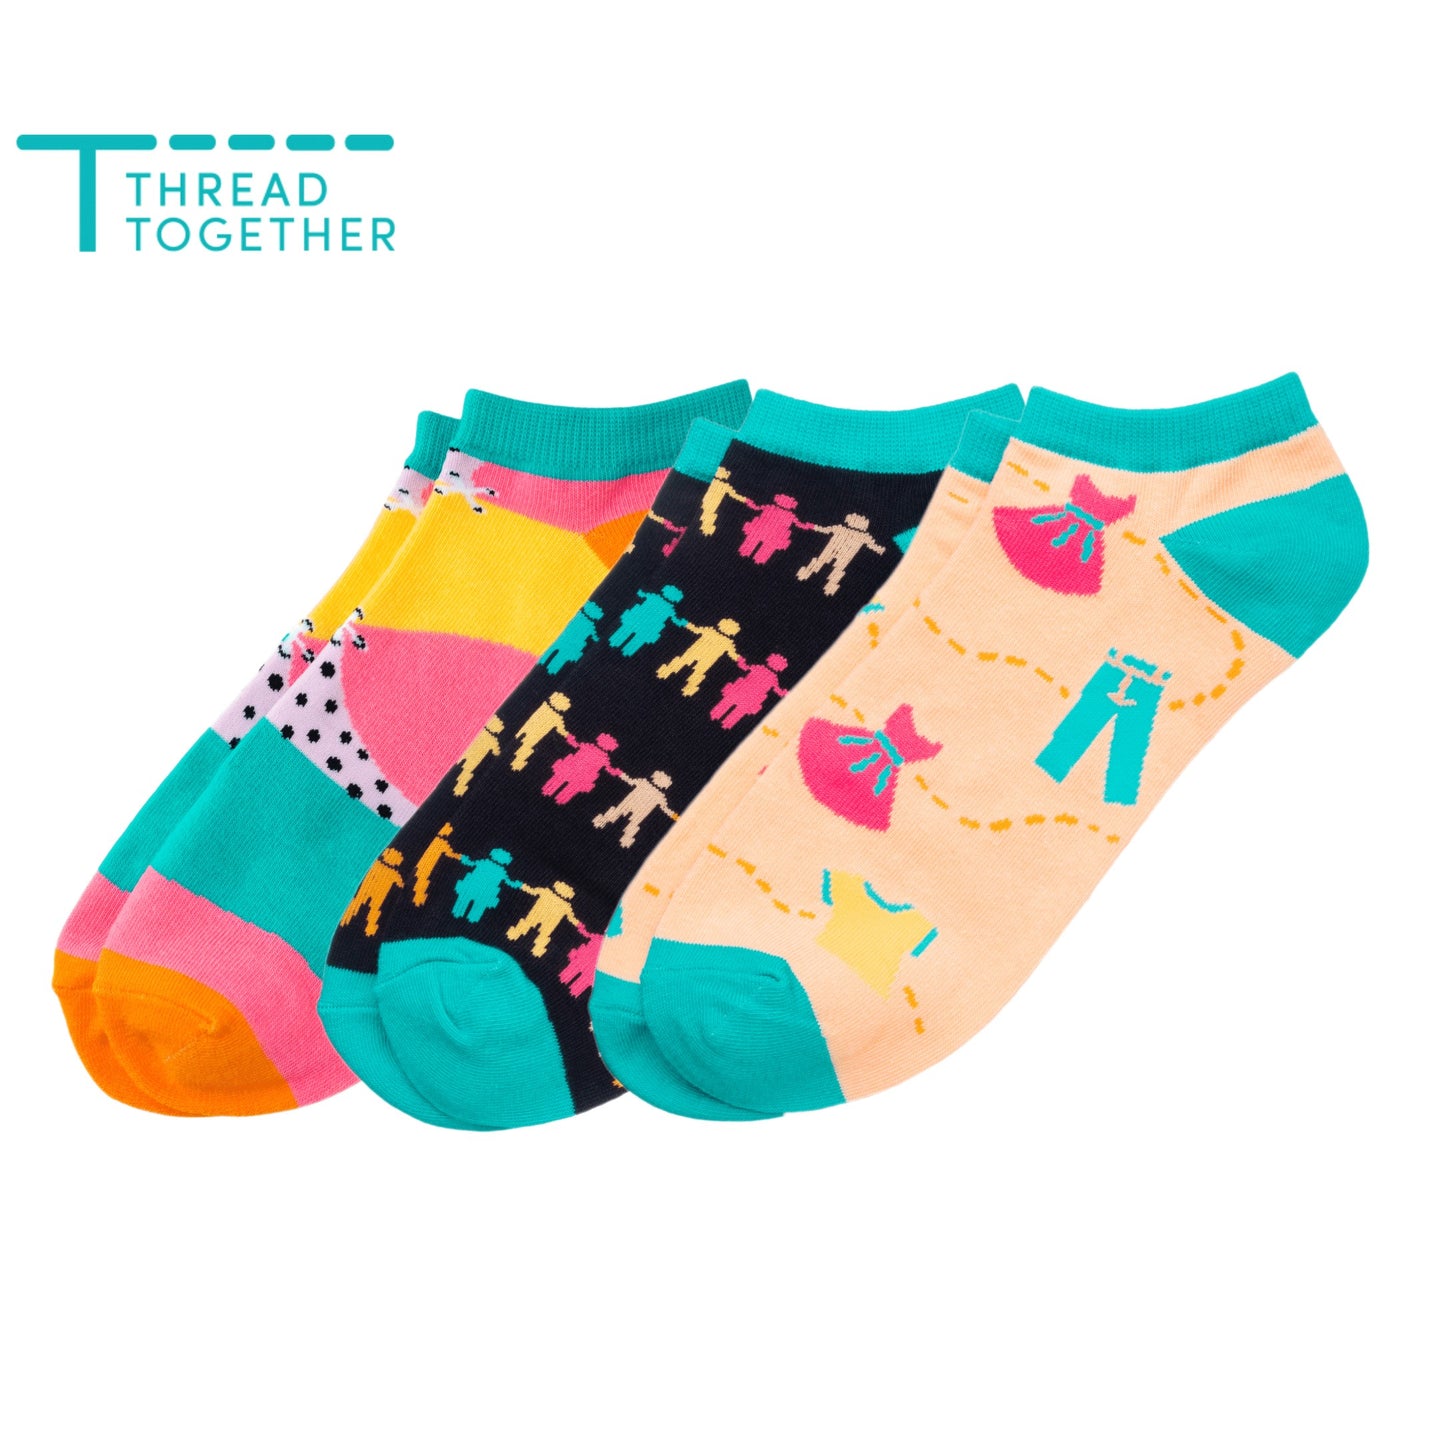 Thread Together Ankle Sock 3-Pack Sydney Sock Project